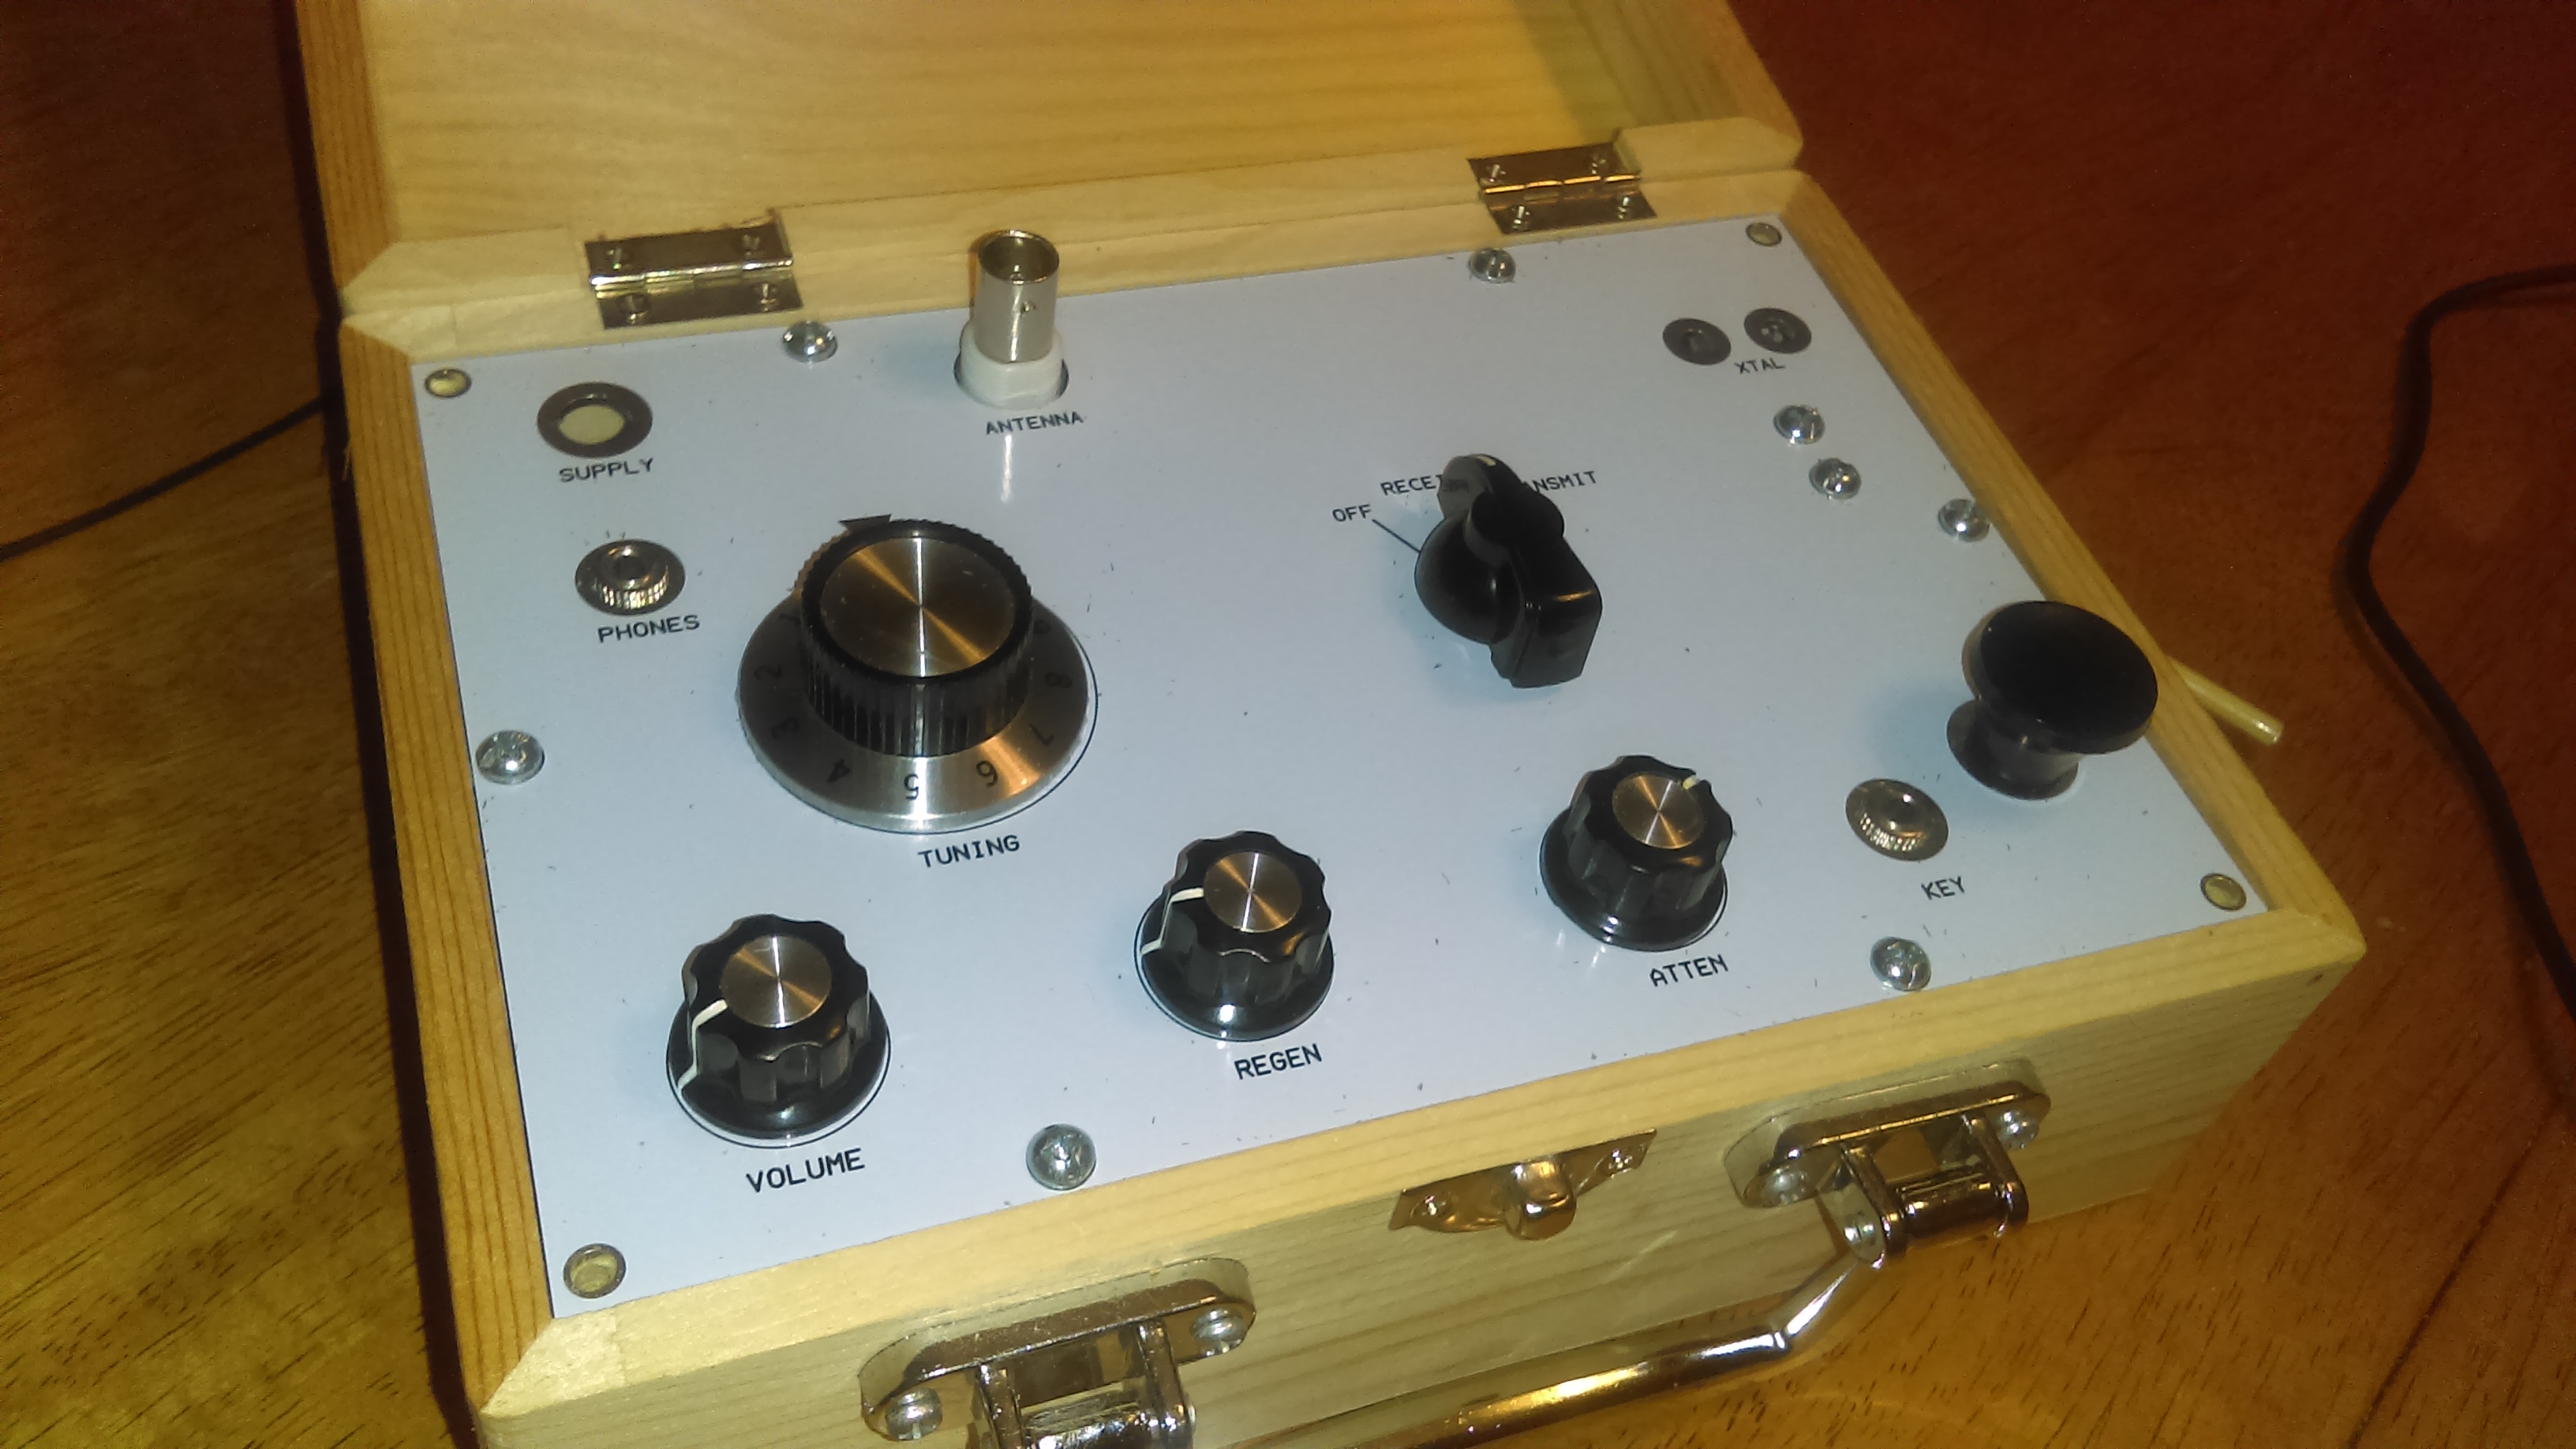 4 State QRP Group original Bayou Jumper kit shown in wooden enclosure.